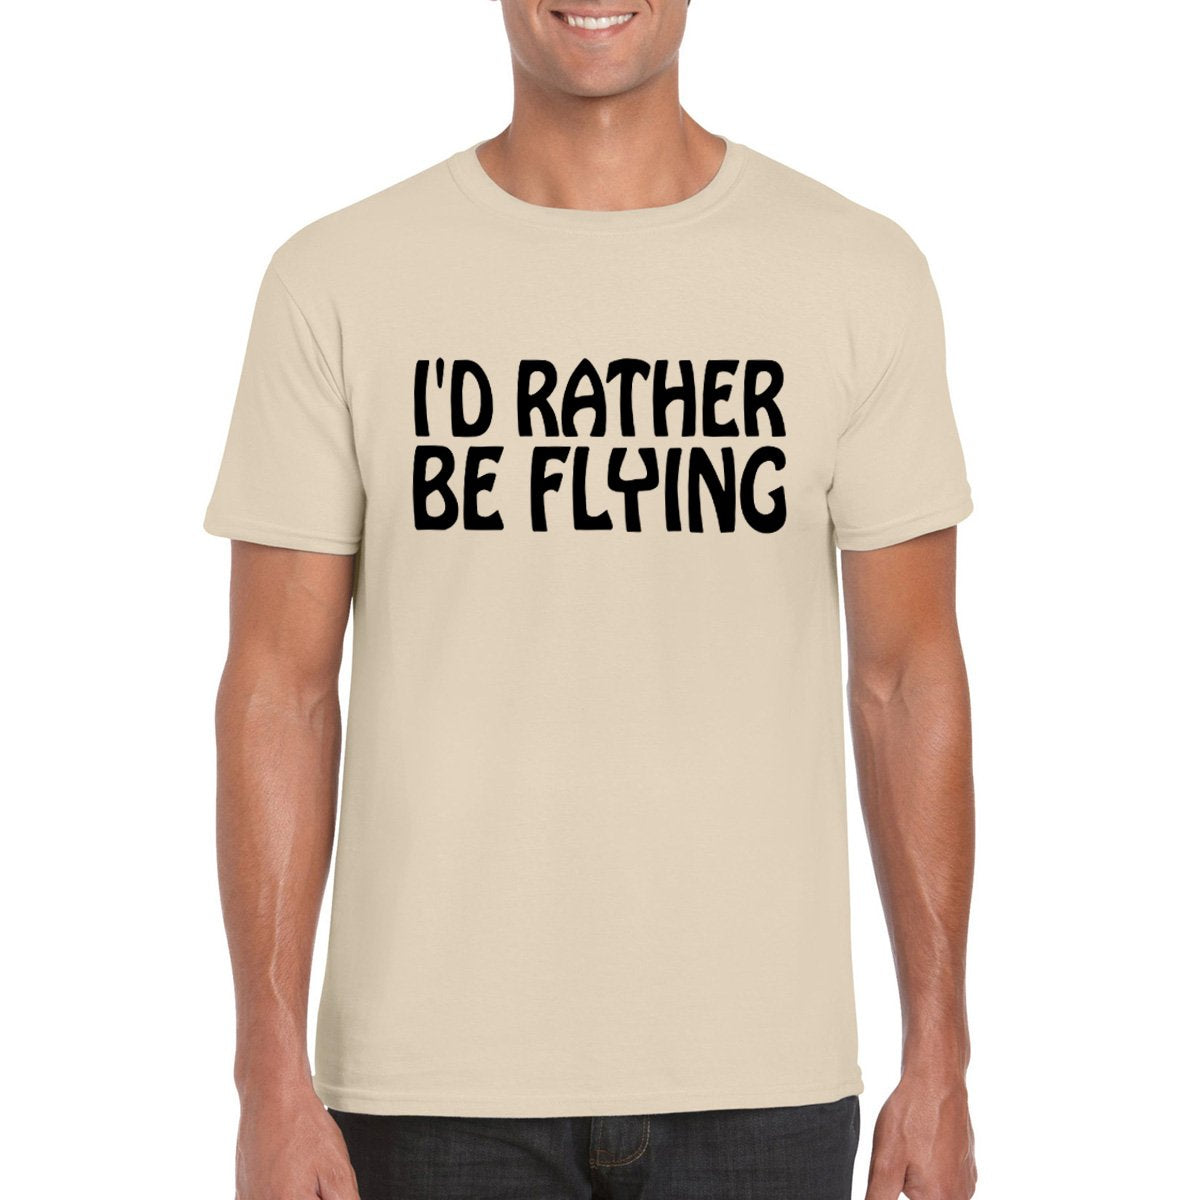 I'D RATHER BE FLYING Unisex Semi-Fitted T-Shirt